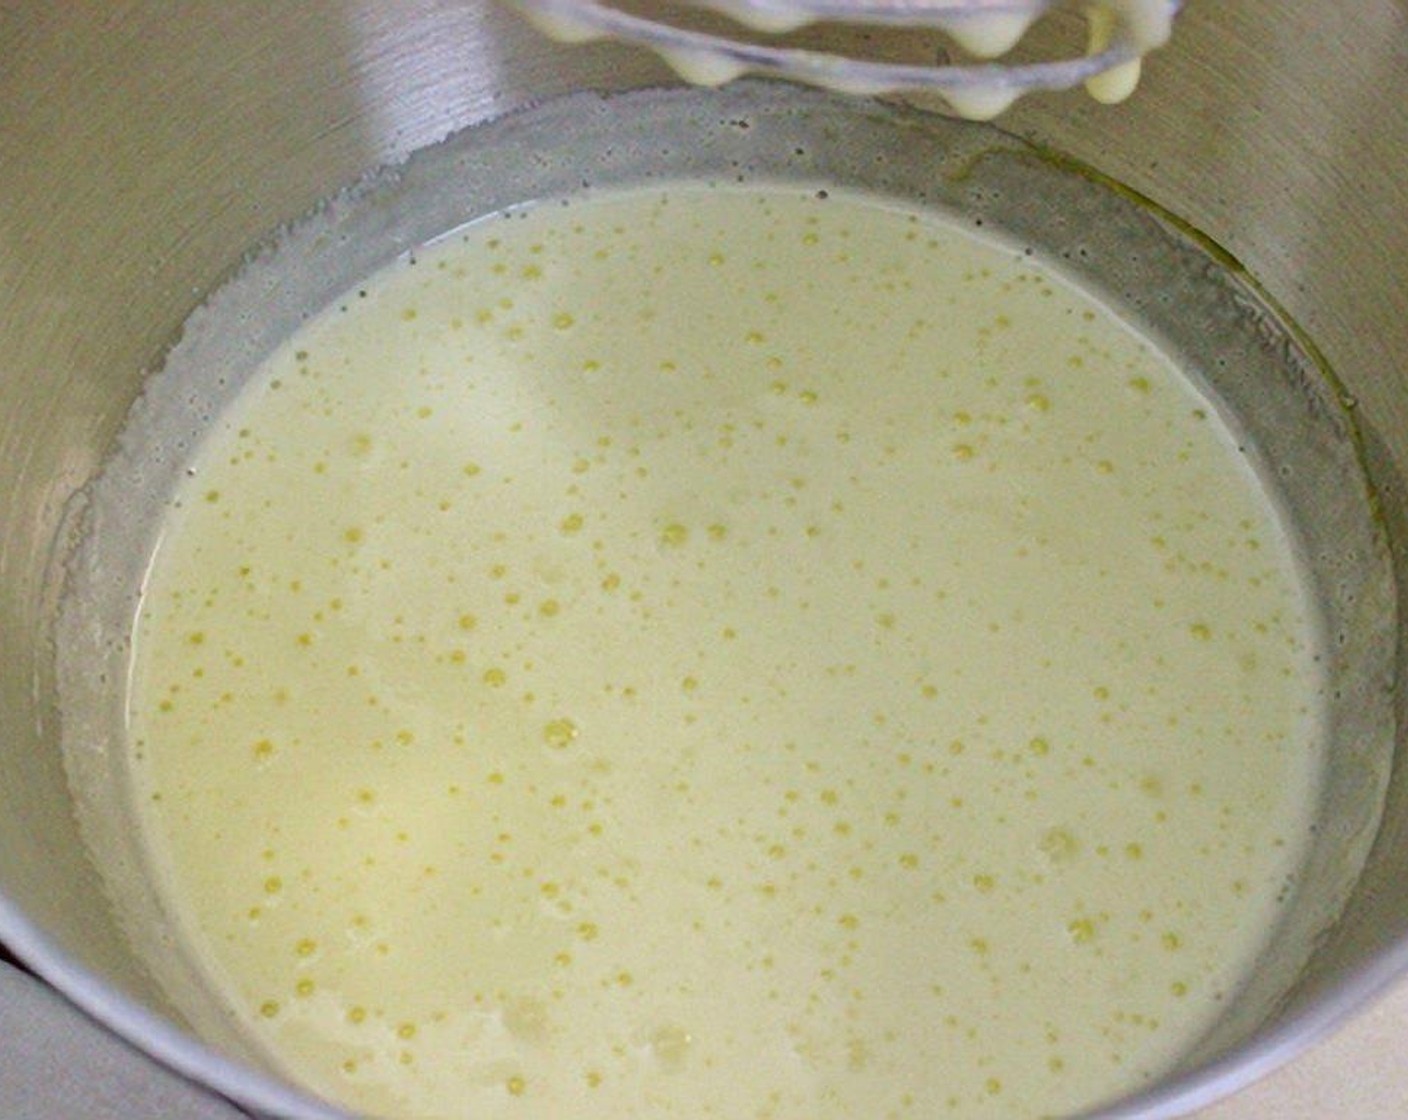 step 2 With a whisk attachment on a standing mixer or using a hand mixer and a large bowl, mix the Eggs (6) and Granulated Sugar (1 cup) on medium speed until light and fluffy, about 5 minutes.